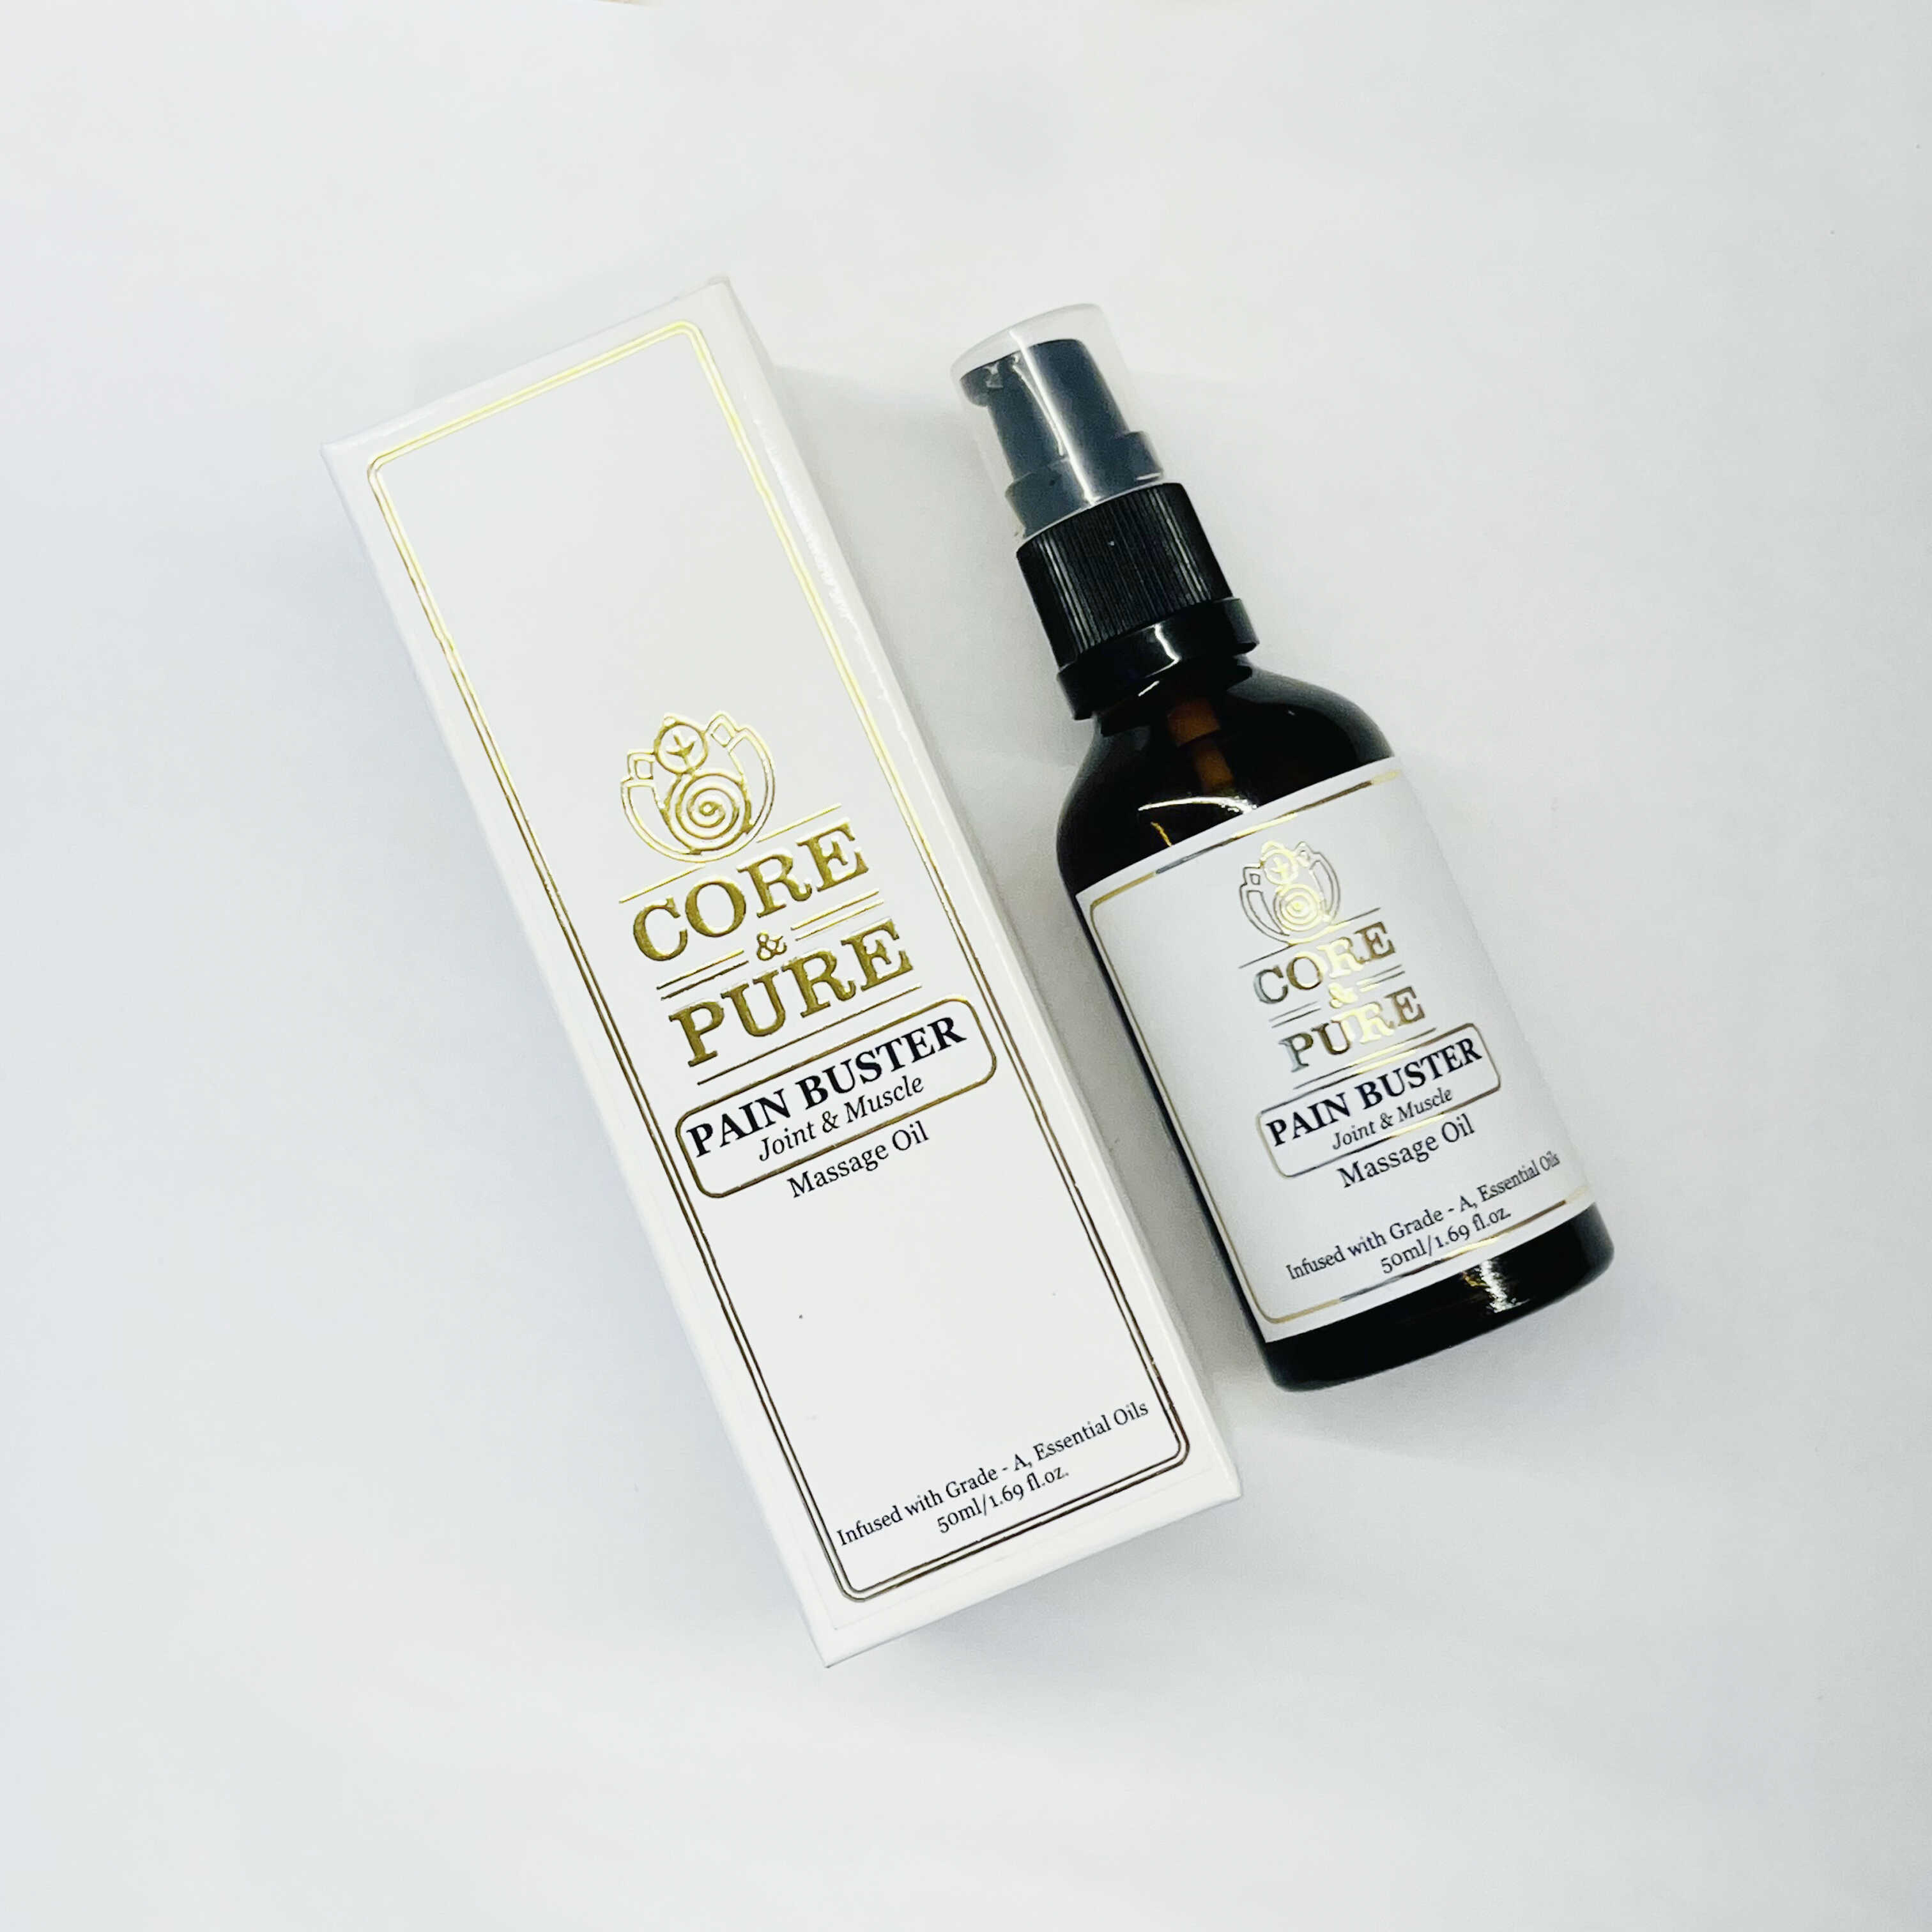 CORE & PURE Pain Buster Oil